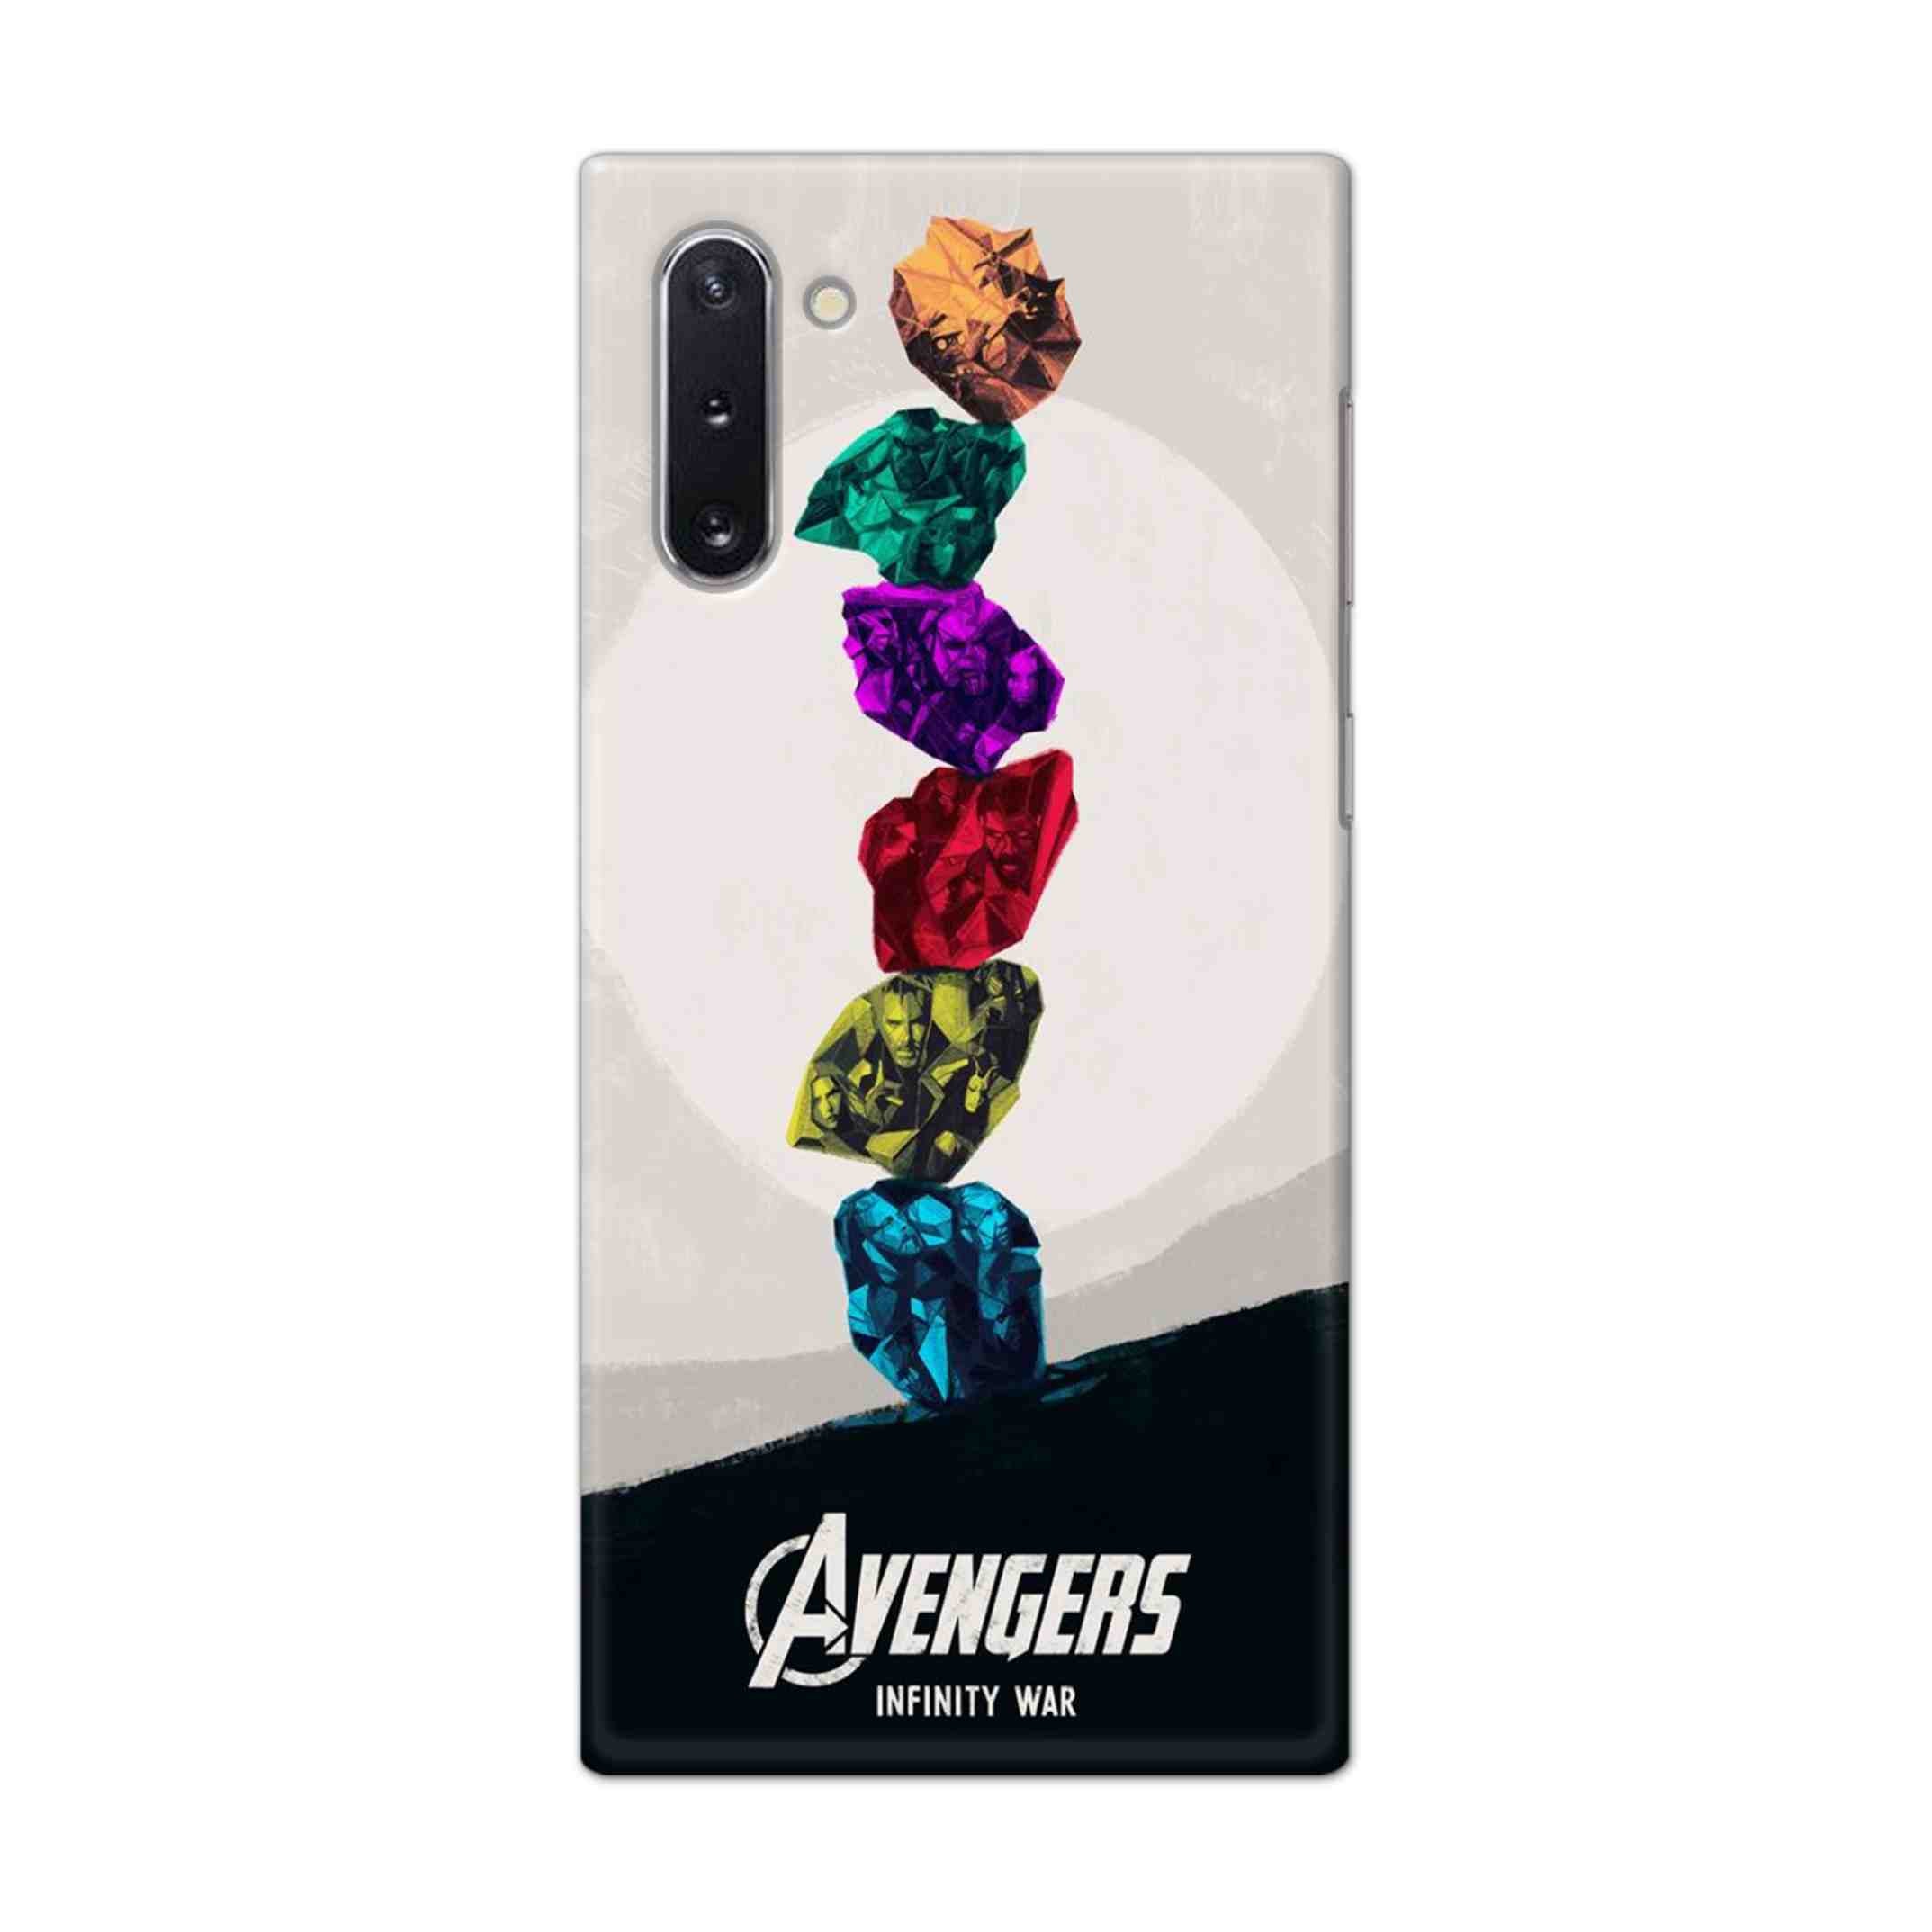 Buy Avengers Stone Hard Back Mobile Phone Case Cover For Samsung Galaxy Note 10 Online